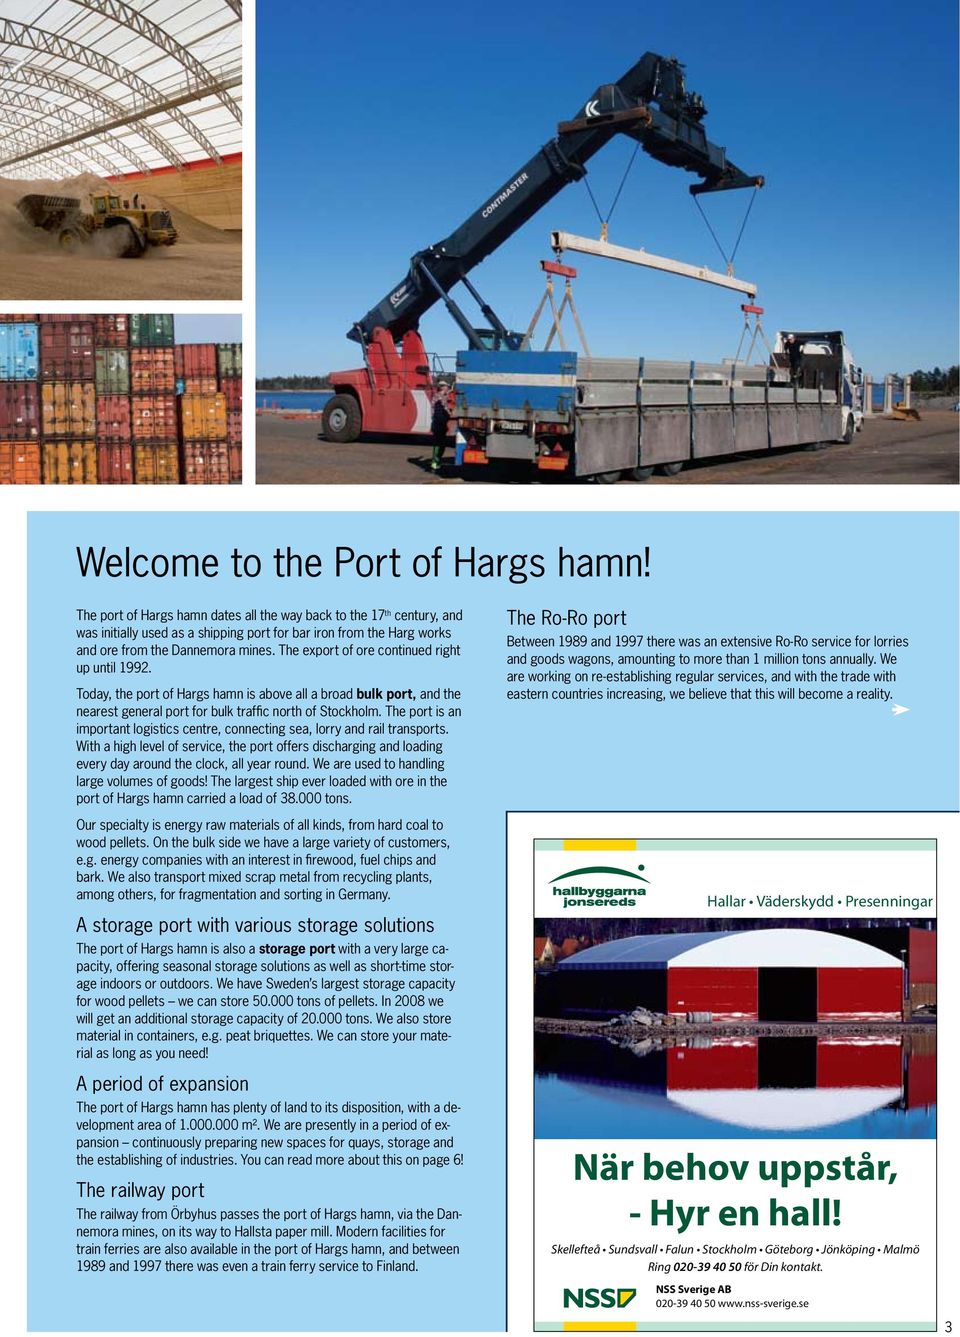 The export of ore continued right up until 1992. Today, the port of Hargs hamn is above all a broad bulk port, and the nearest general port for bulk traffic north of Stockholm.